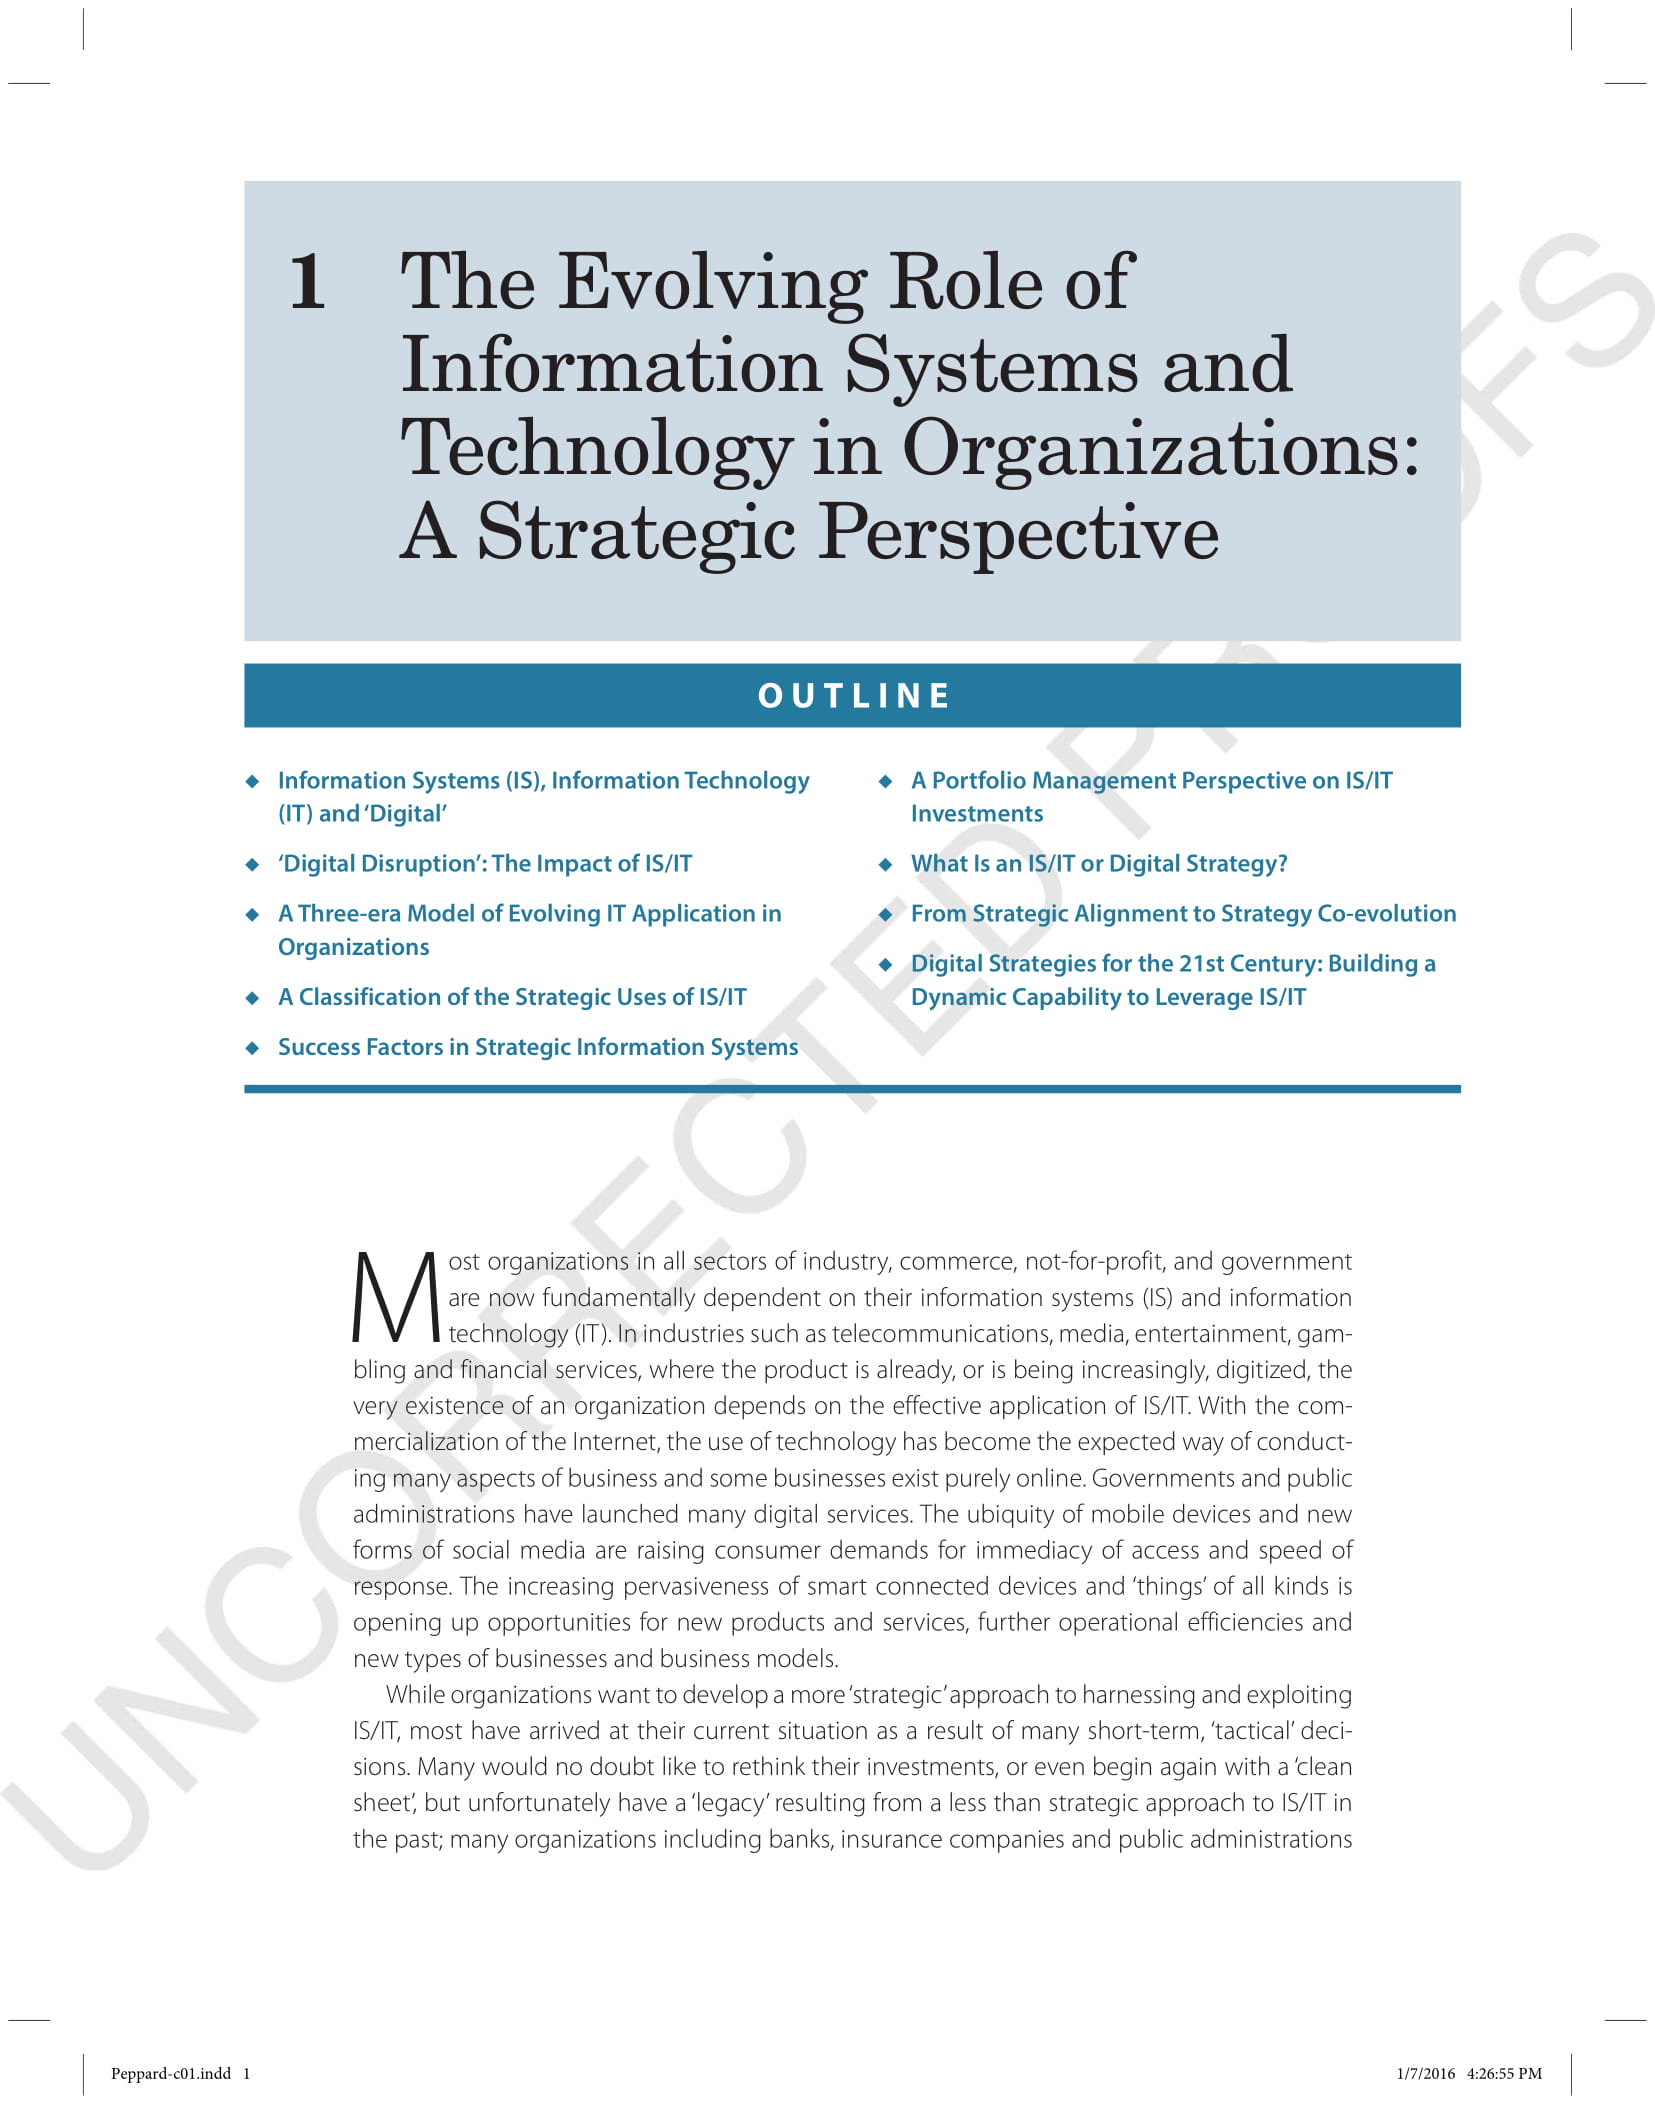 report outline on the evolving role of information systems and technology in organizations example 01